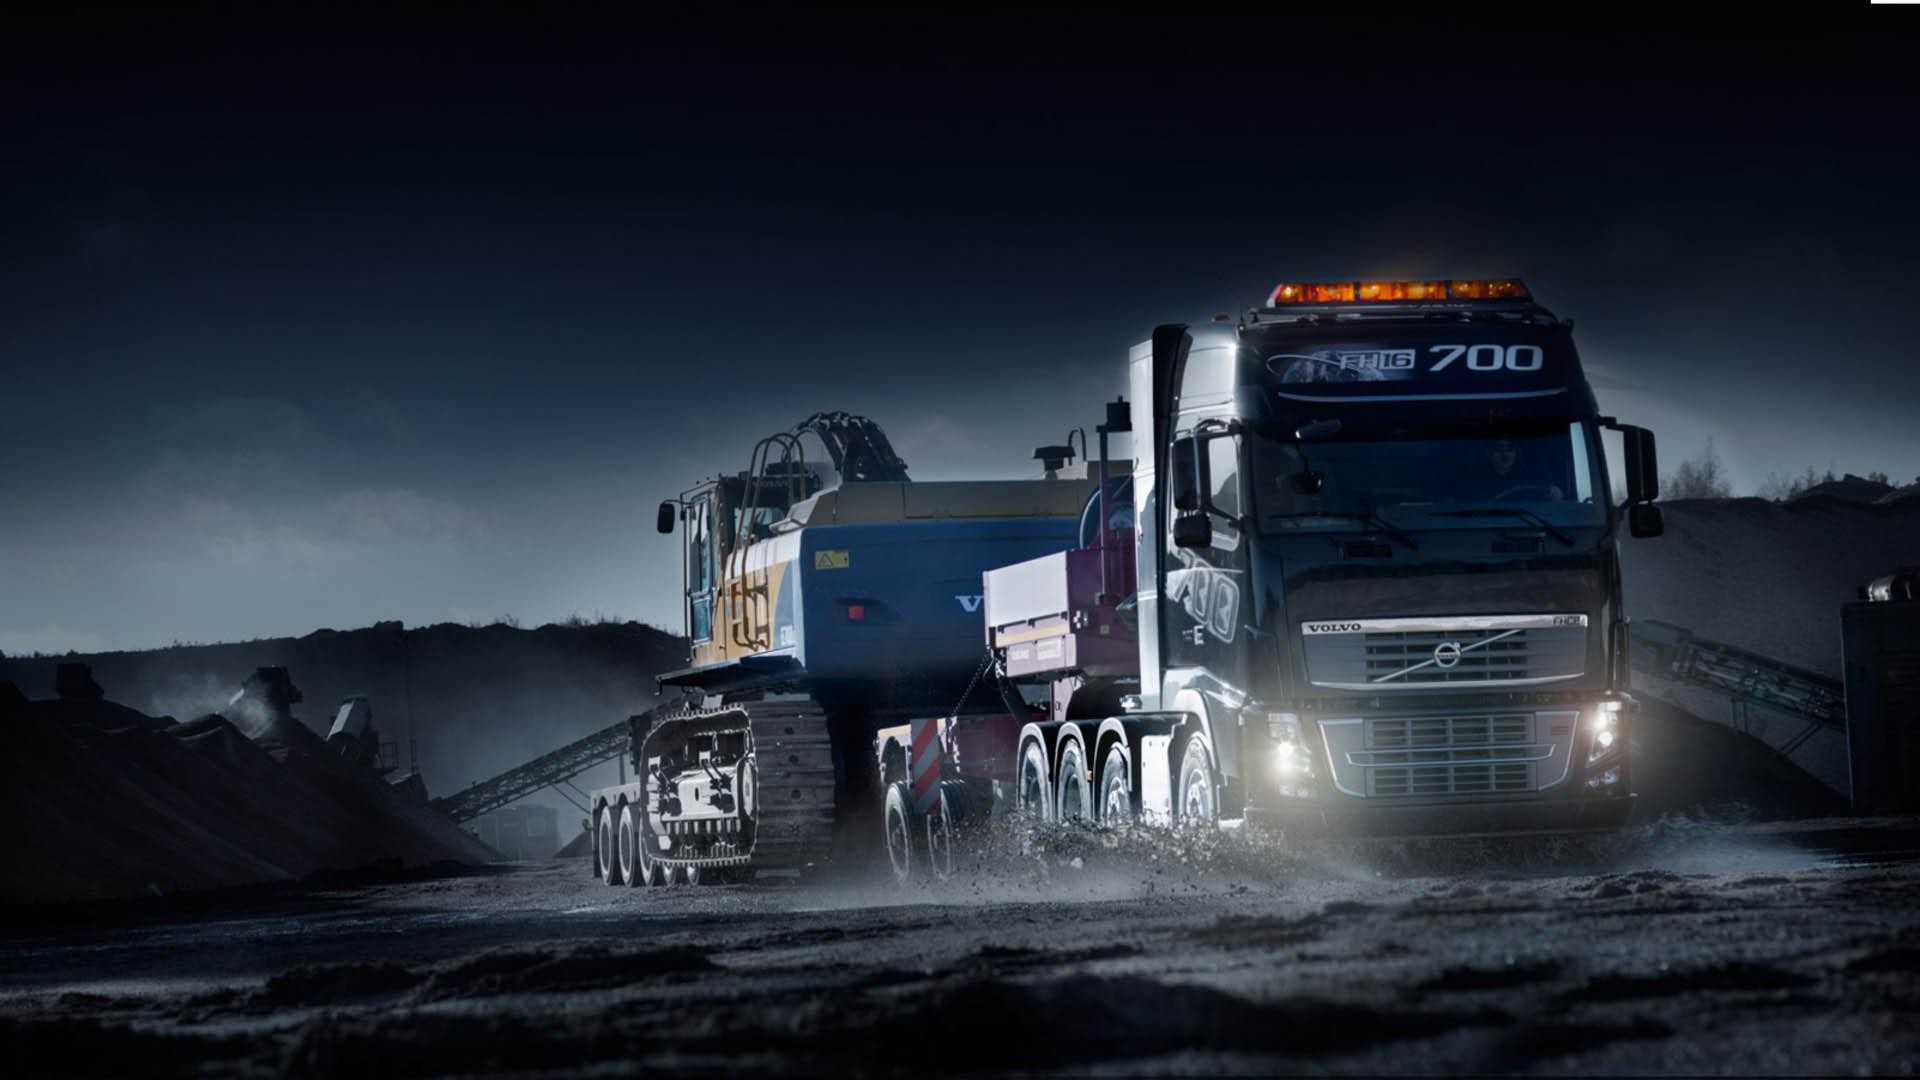 1920x1080 Volvo-Truck-For-Iphone-sNc-wallpaper-wp20010912-1